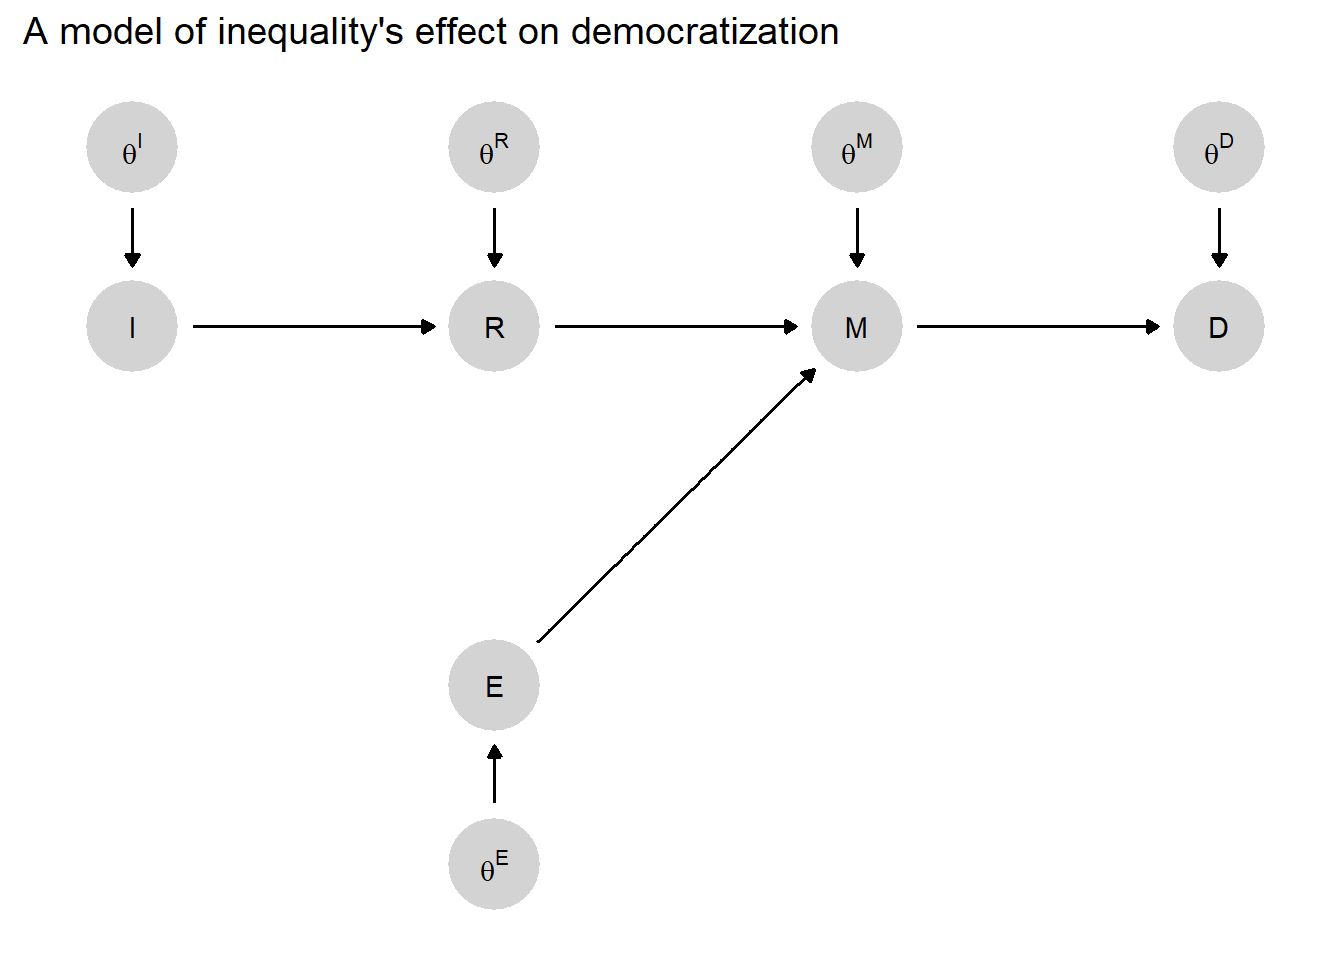 A simple causal model in which high inequality ($I$) affects democratization ($D$) via redistributive demands ($R$) and mass mobilization ($M$), which is also a function of ethnic homogeneity ($E$). Arrows show relations of causal dependence between variables.